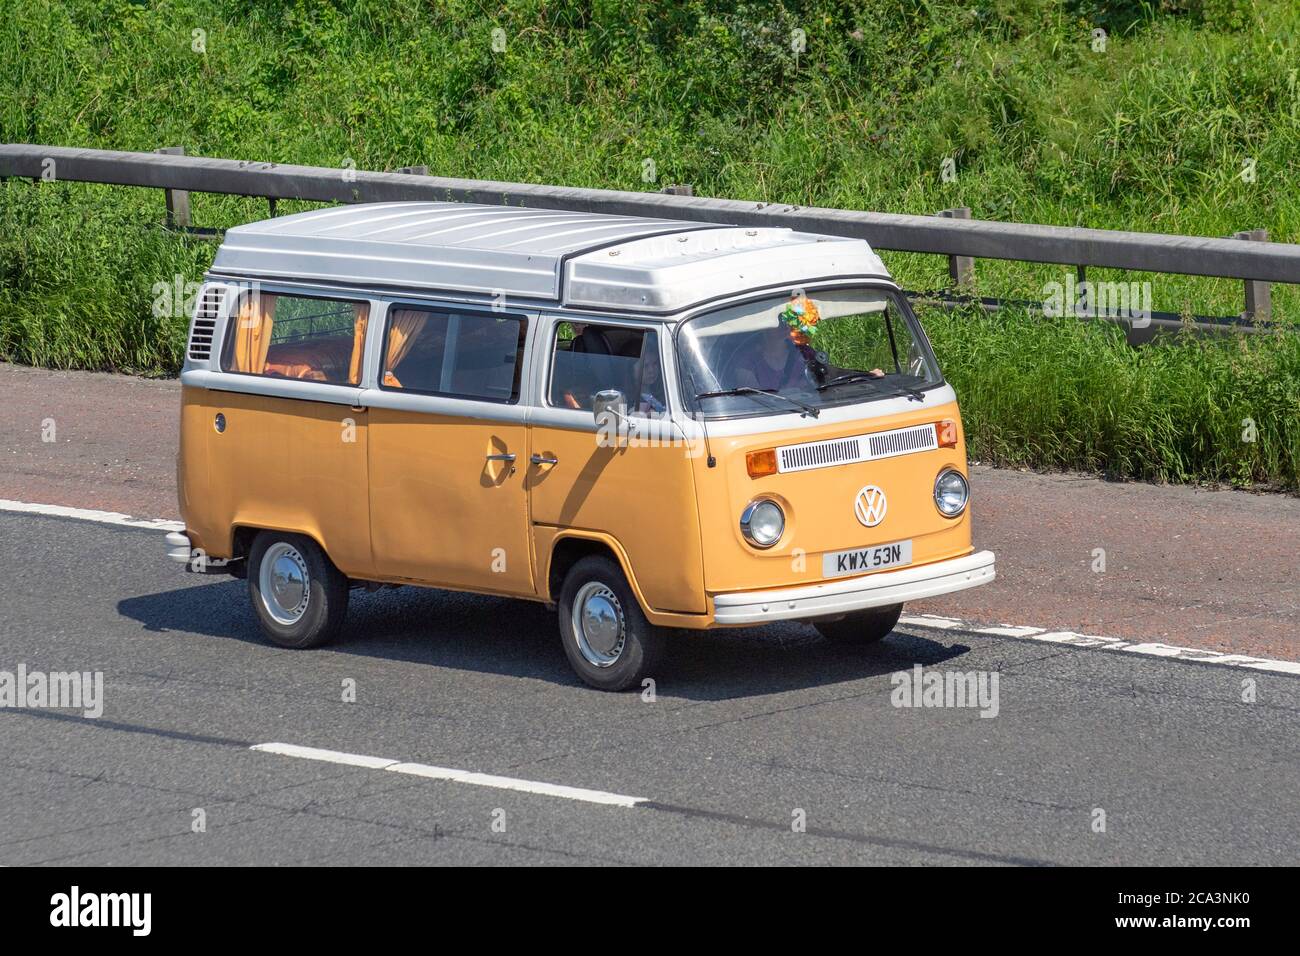 1975 70s cream white VW Volkswagen Caravans and Motorhomes, campervans on Britain's roads, RV leisure vehicle, family holidays, caravanette vacations, Touring caravan holiday, kombi van conversions, Vanagon autohome, Dormobile life on the road, Stock Photo